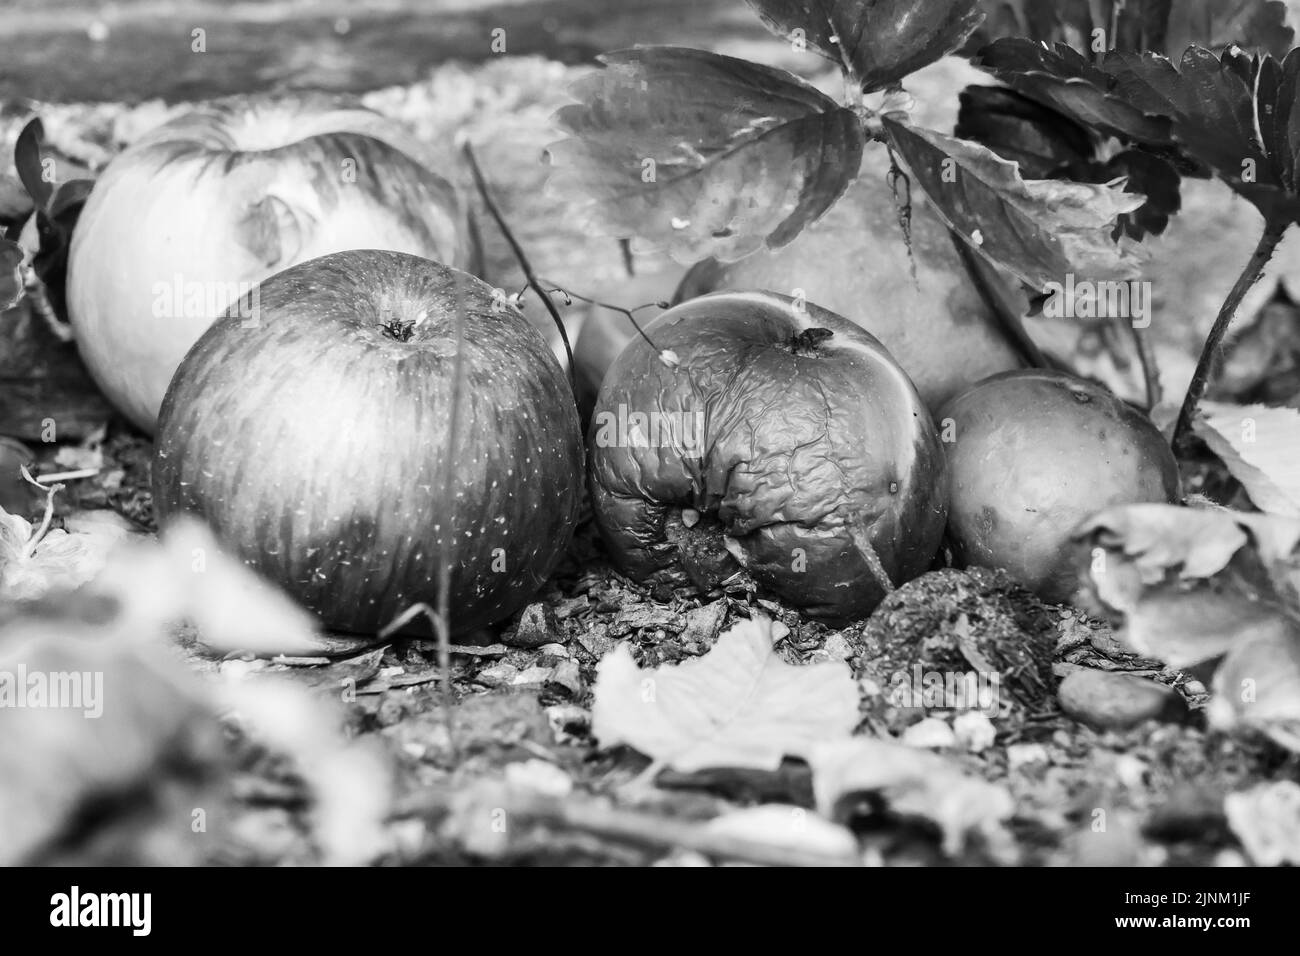 Rotten apples on the ground in black and white Stock Photo